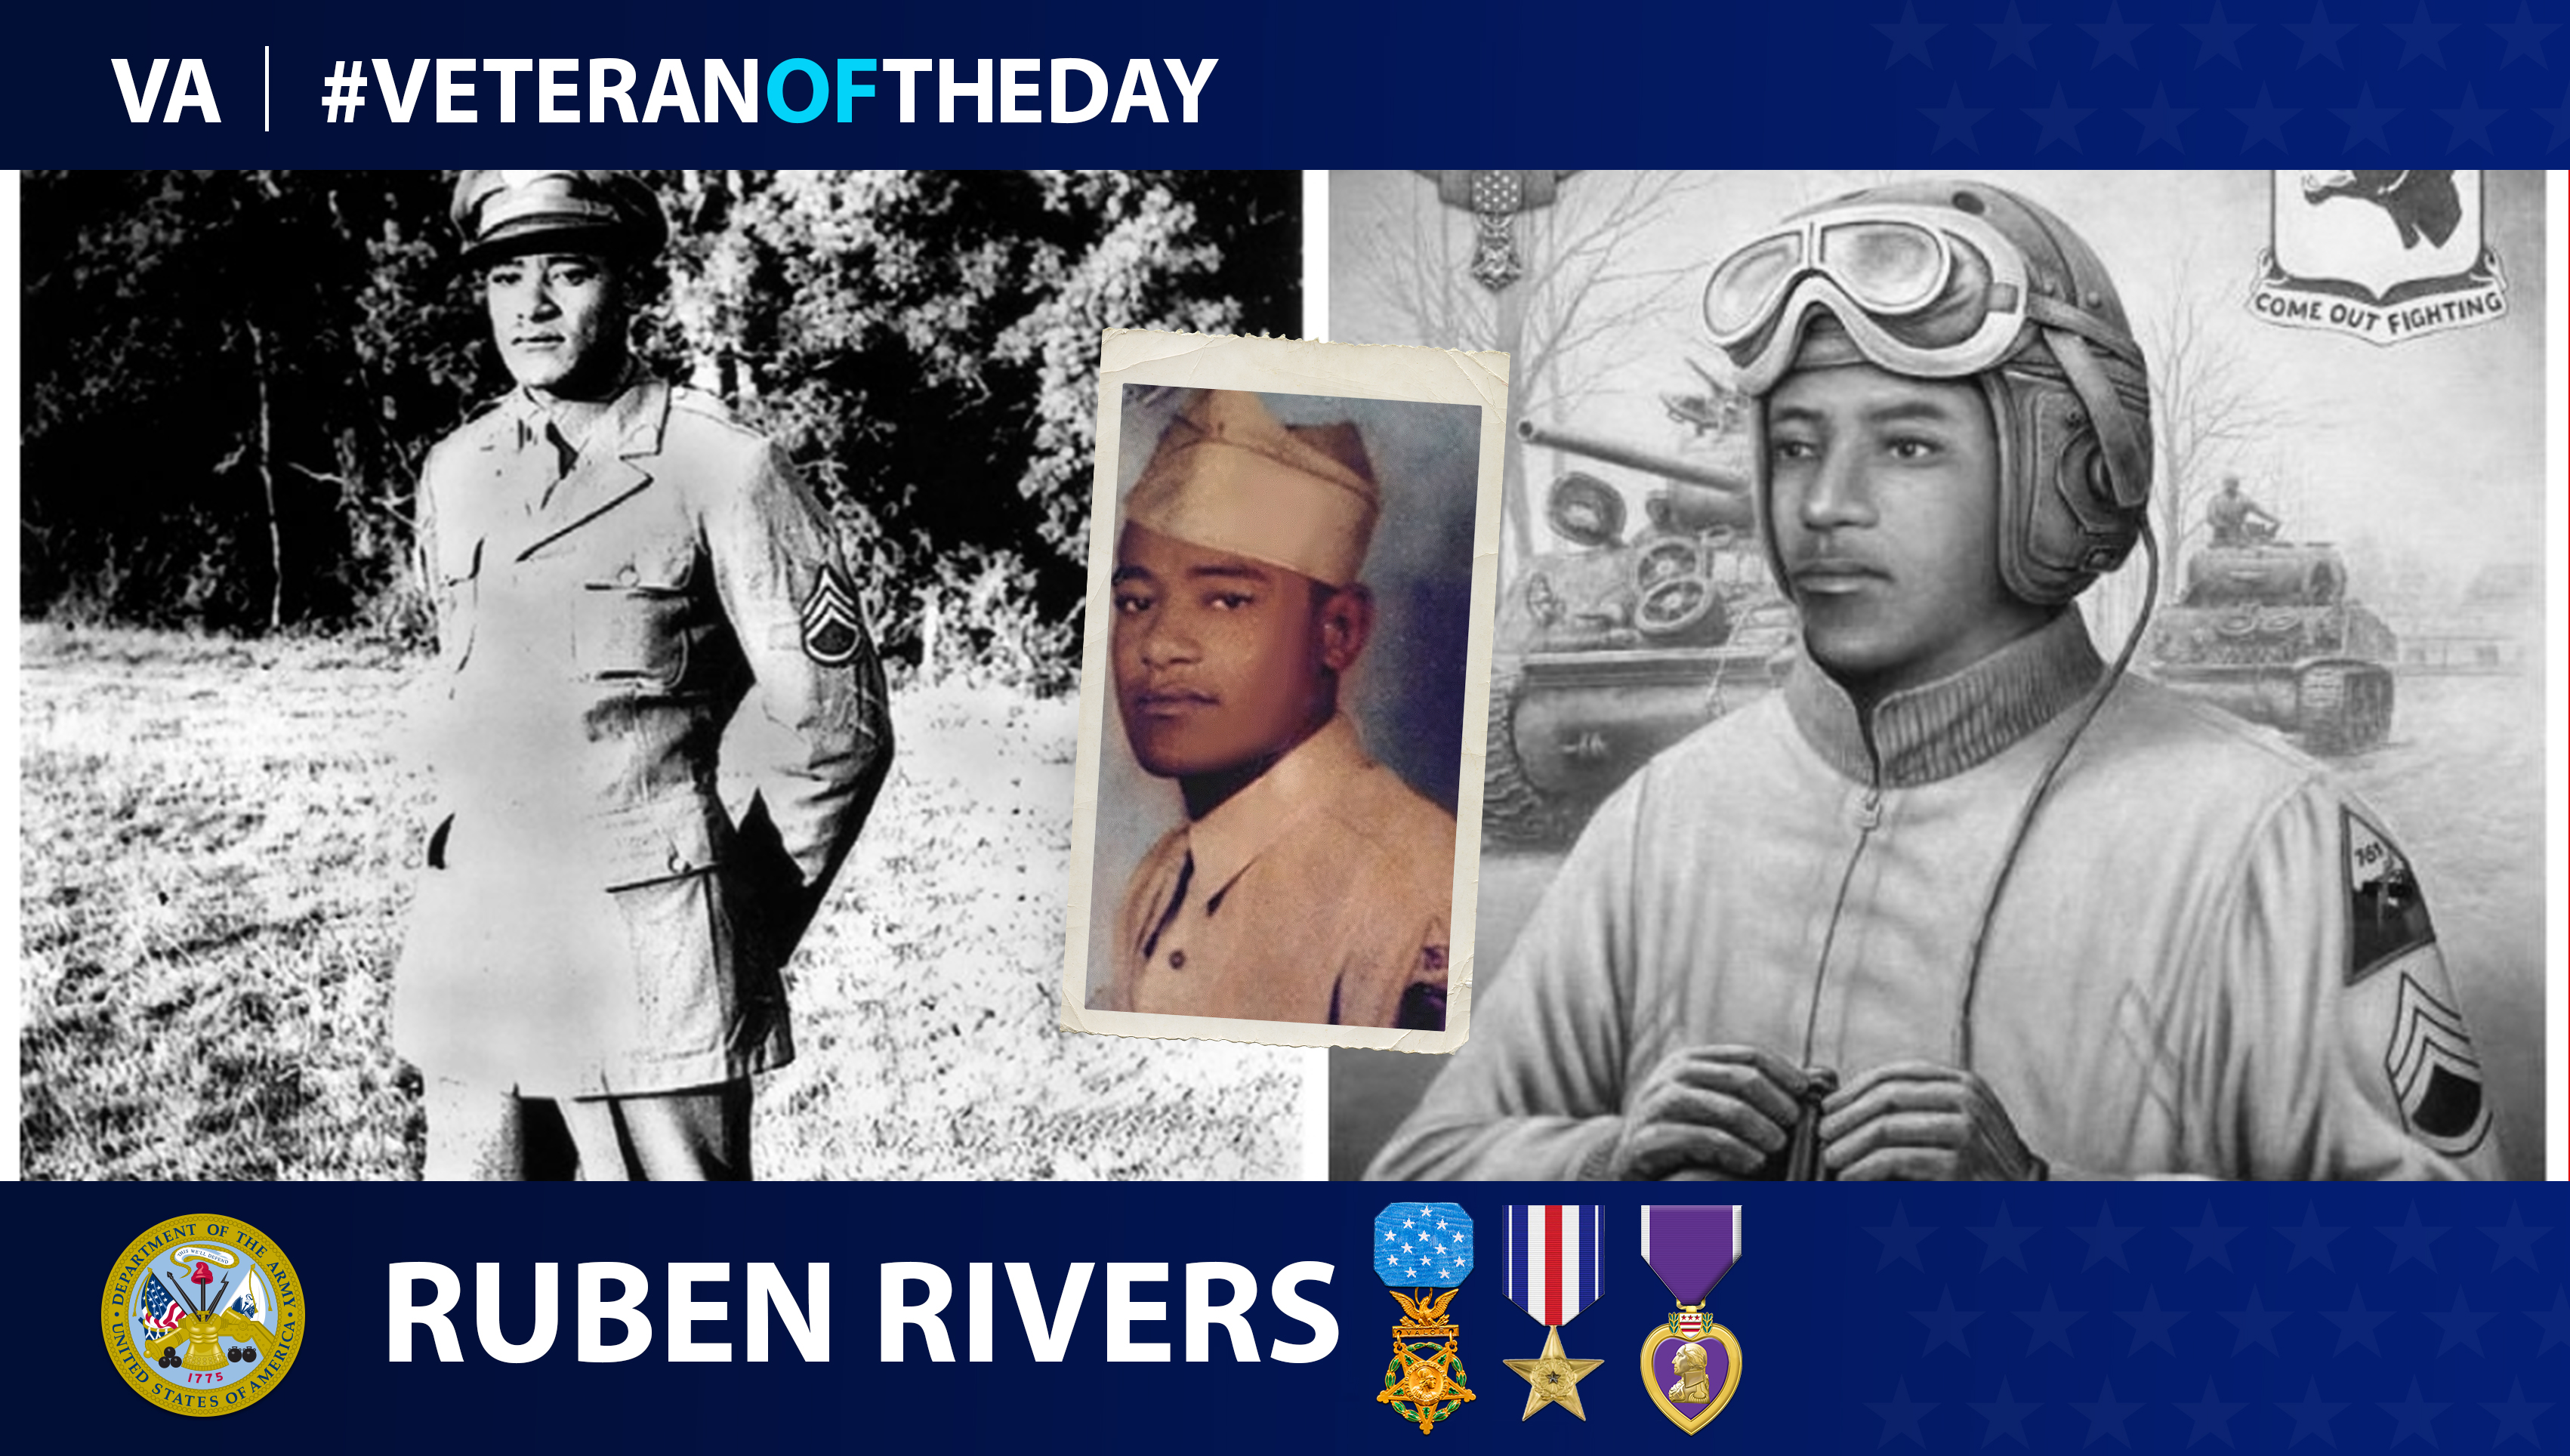 Army Veteran Ruben Rivers is today's Veteran of the day.